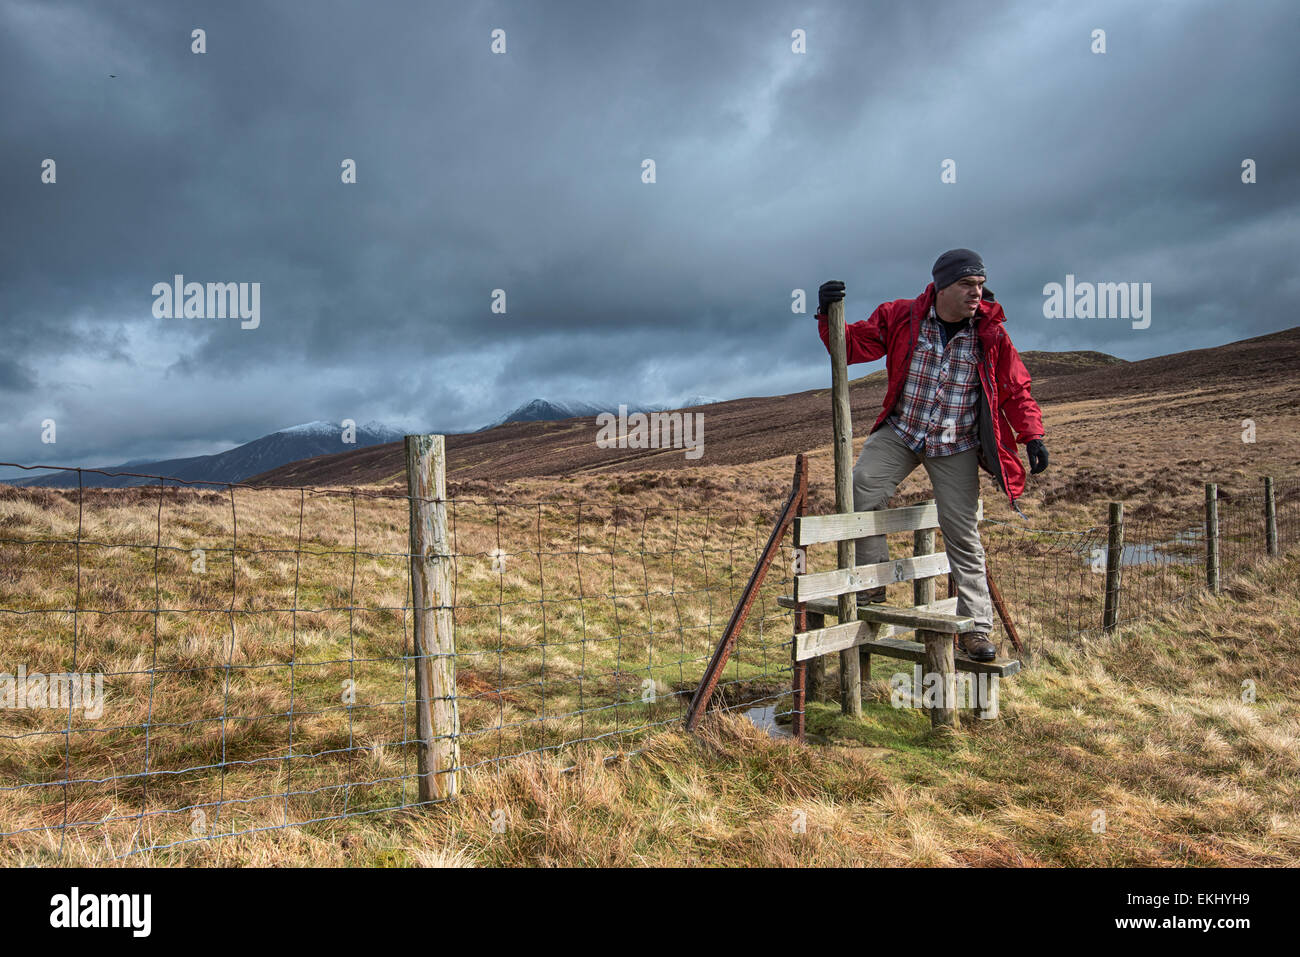 A man climbing over a stile on Blake Fell. The scene is well lit by the sun under a dark cloudy sky Stock Photo